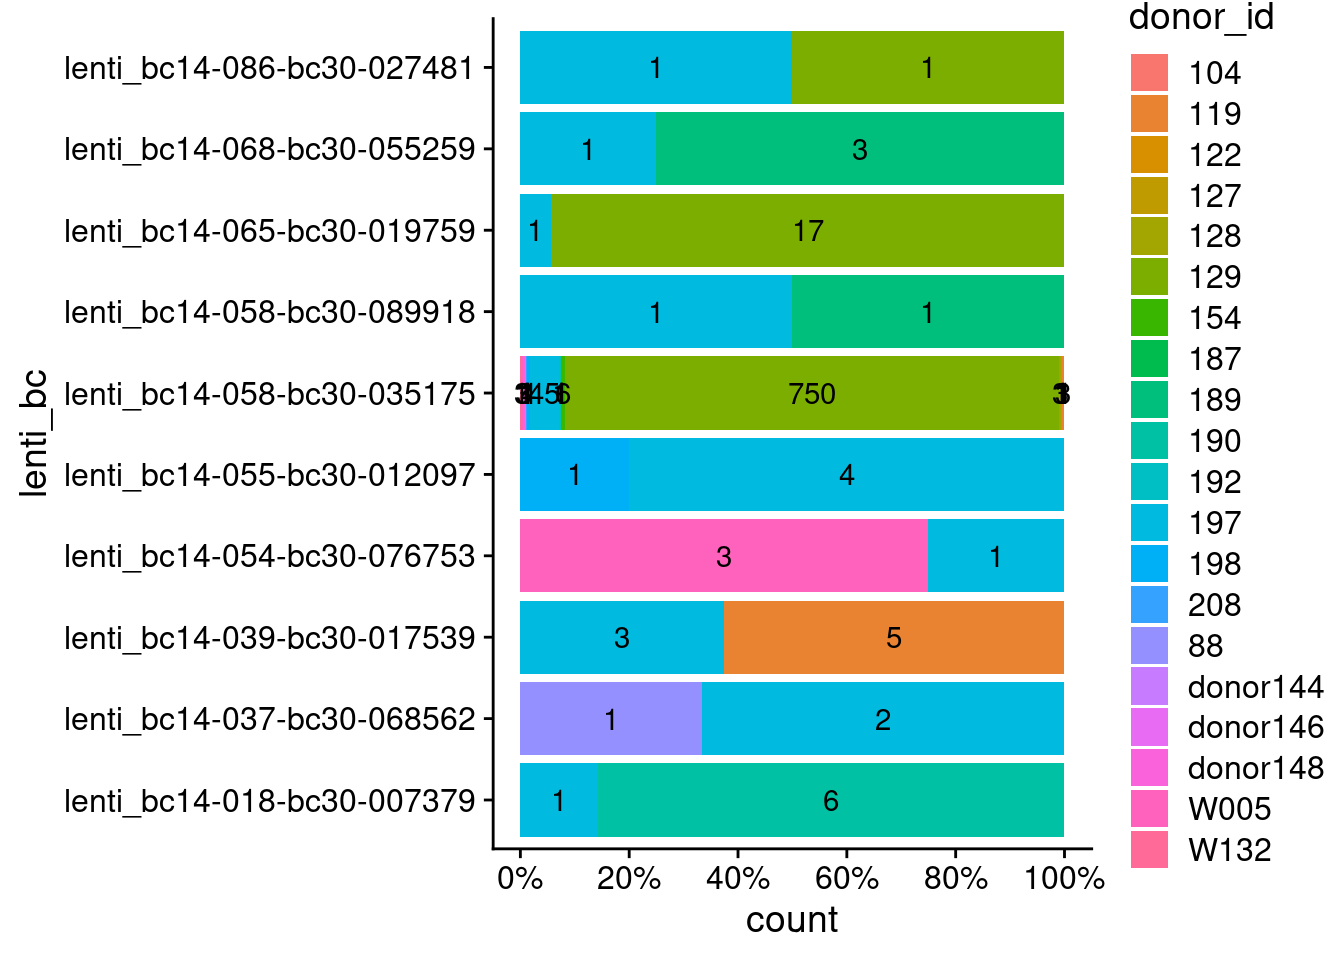 Number of cell barcodes (x-axis) associated with different donors (fill color) for each lenti barcode (y-axis).